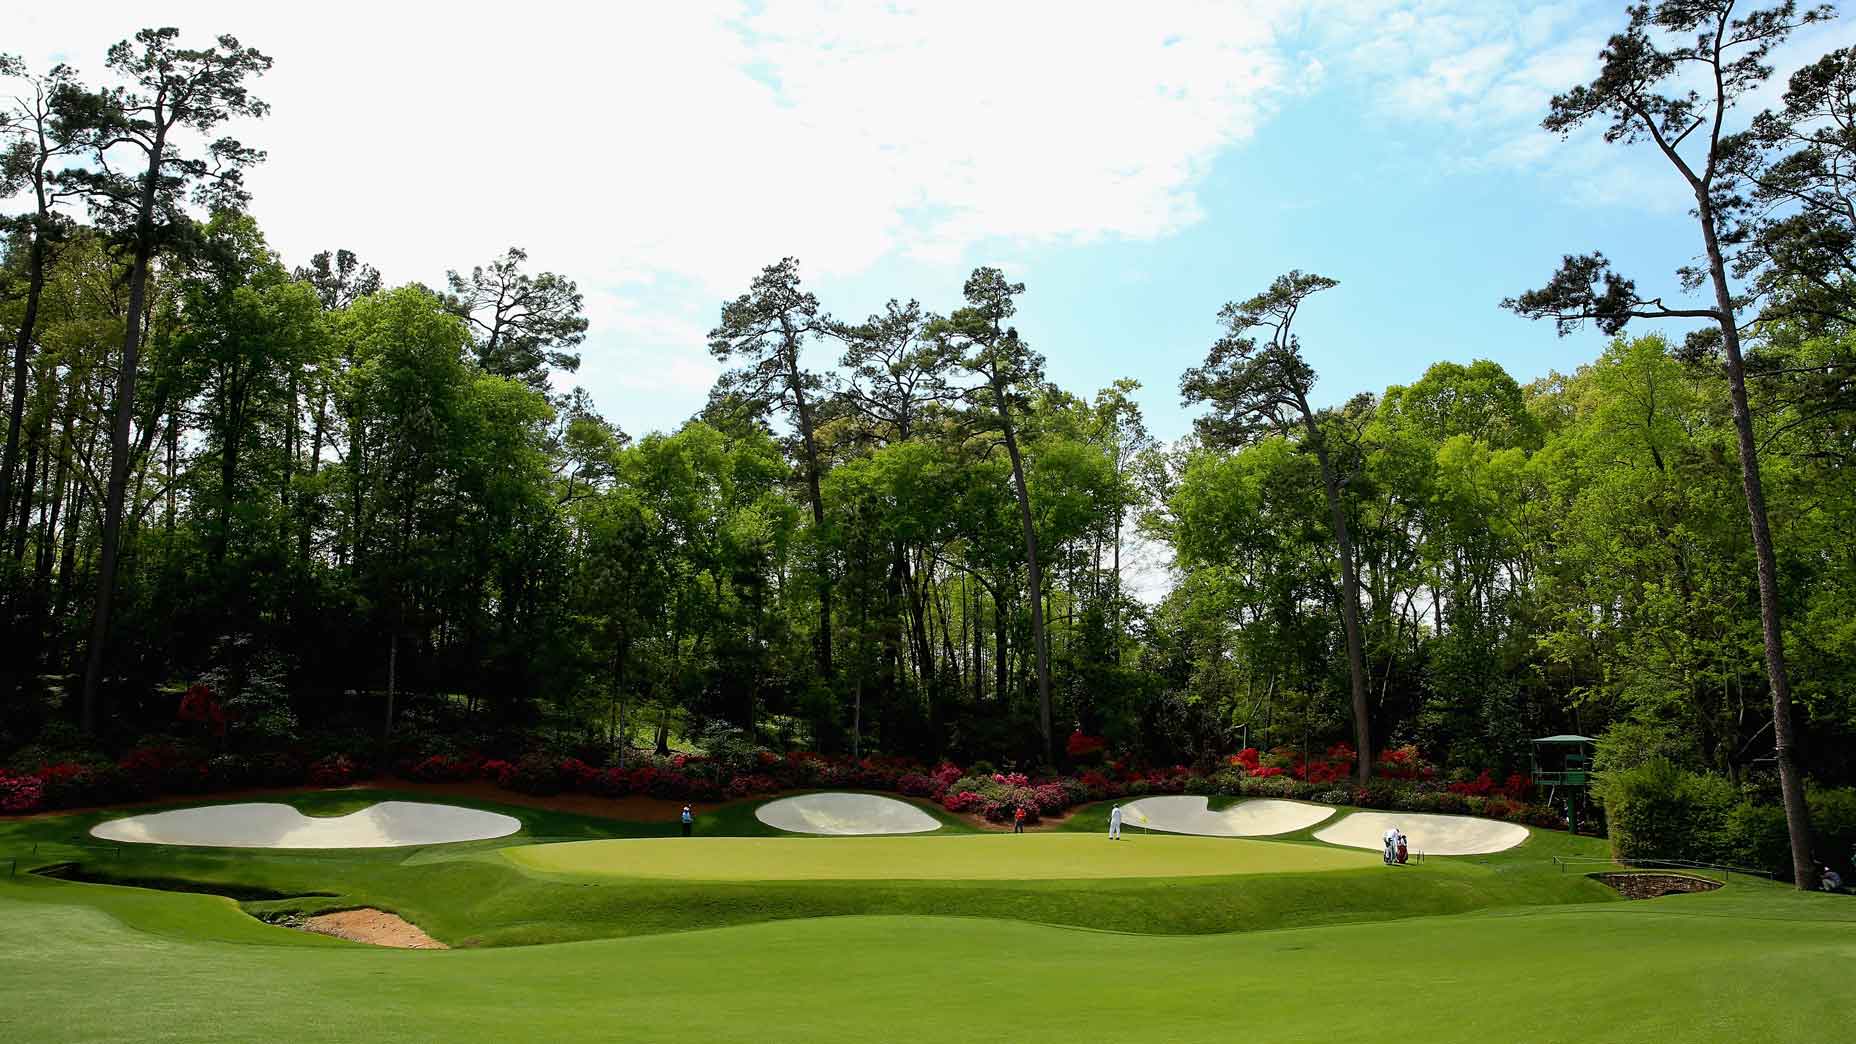 Best golf courses in according to GOLF Magazine's raters